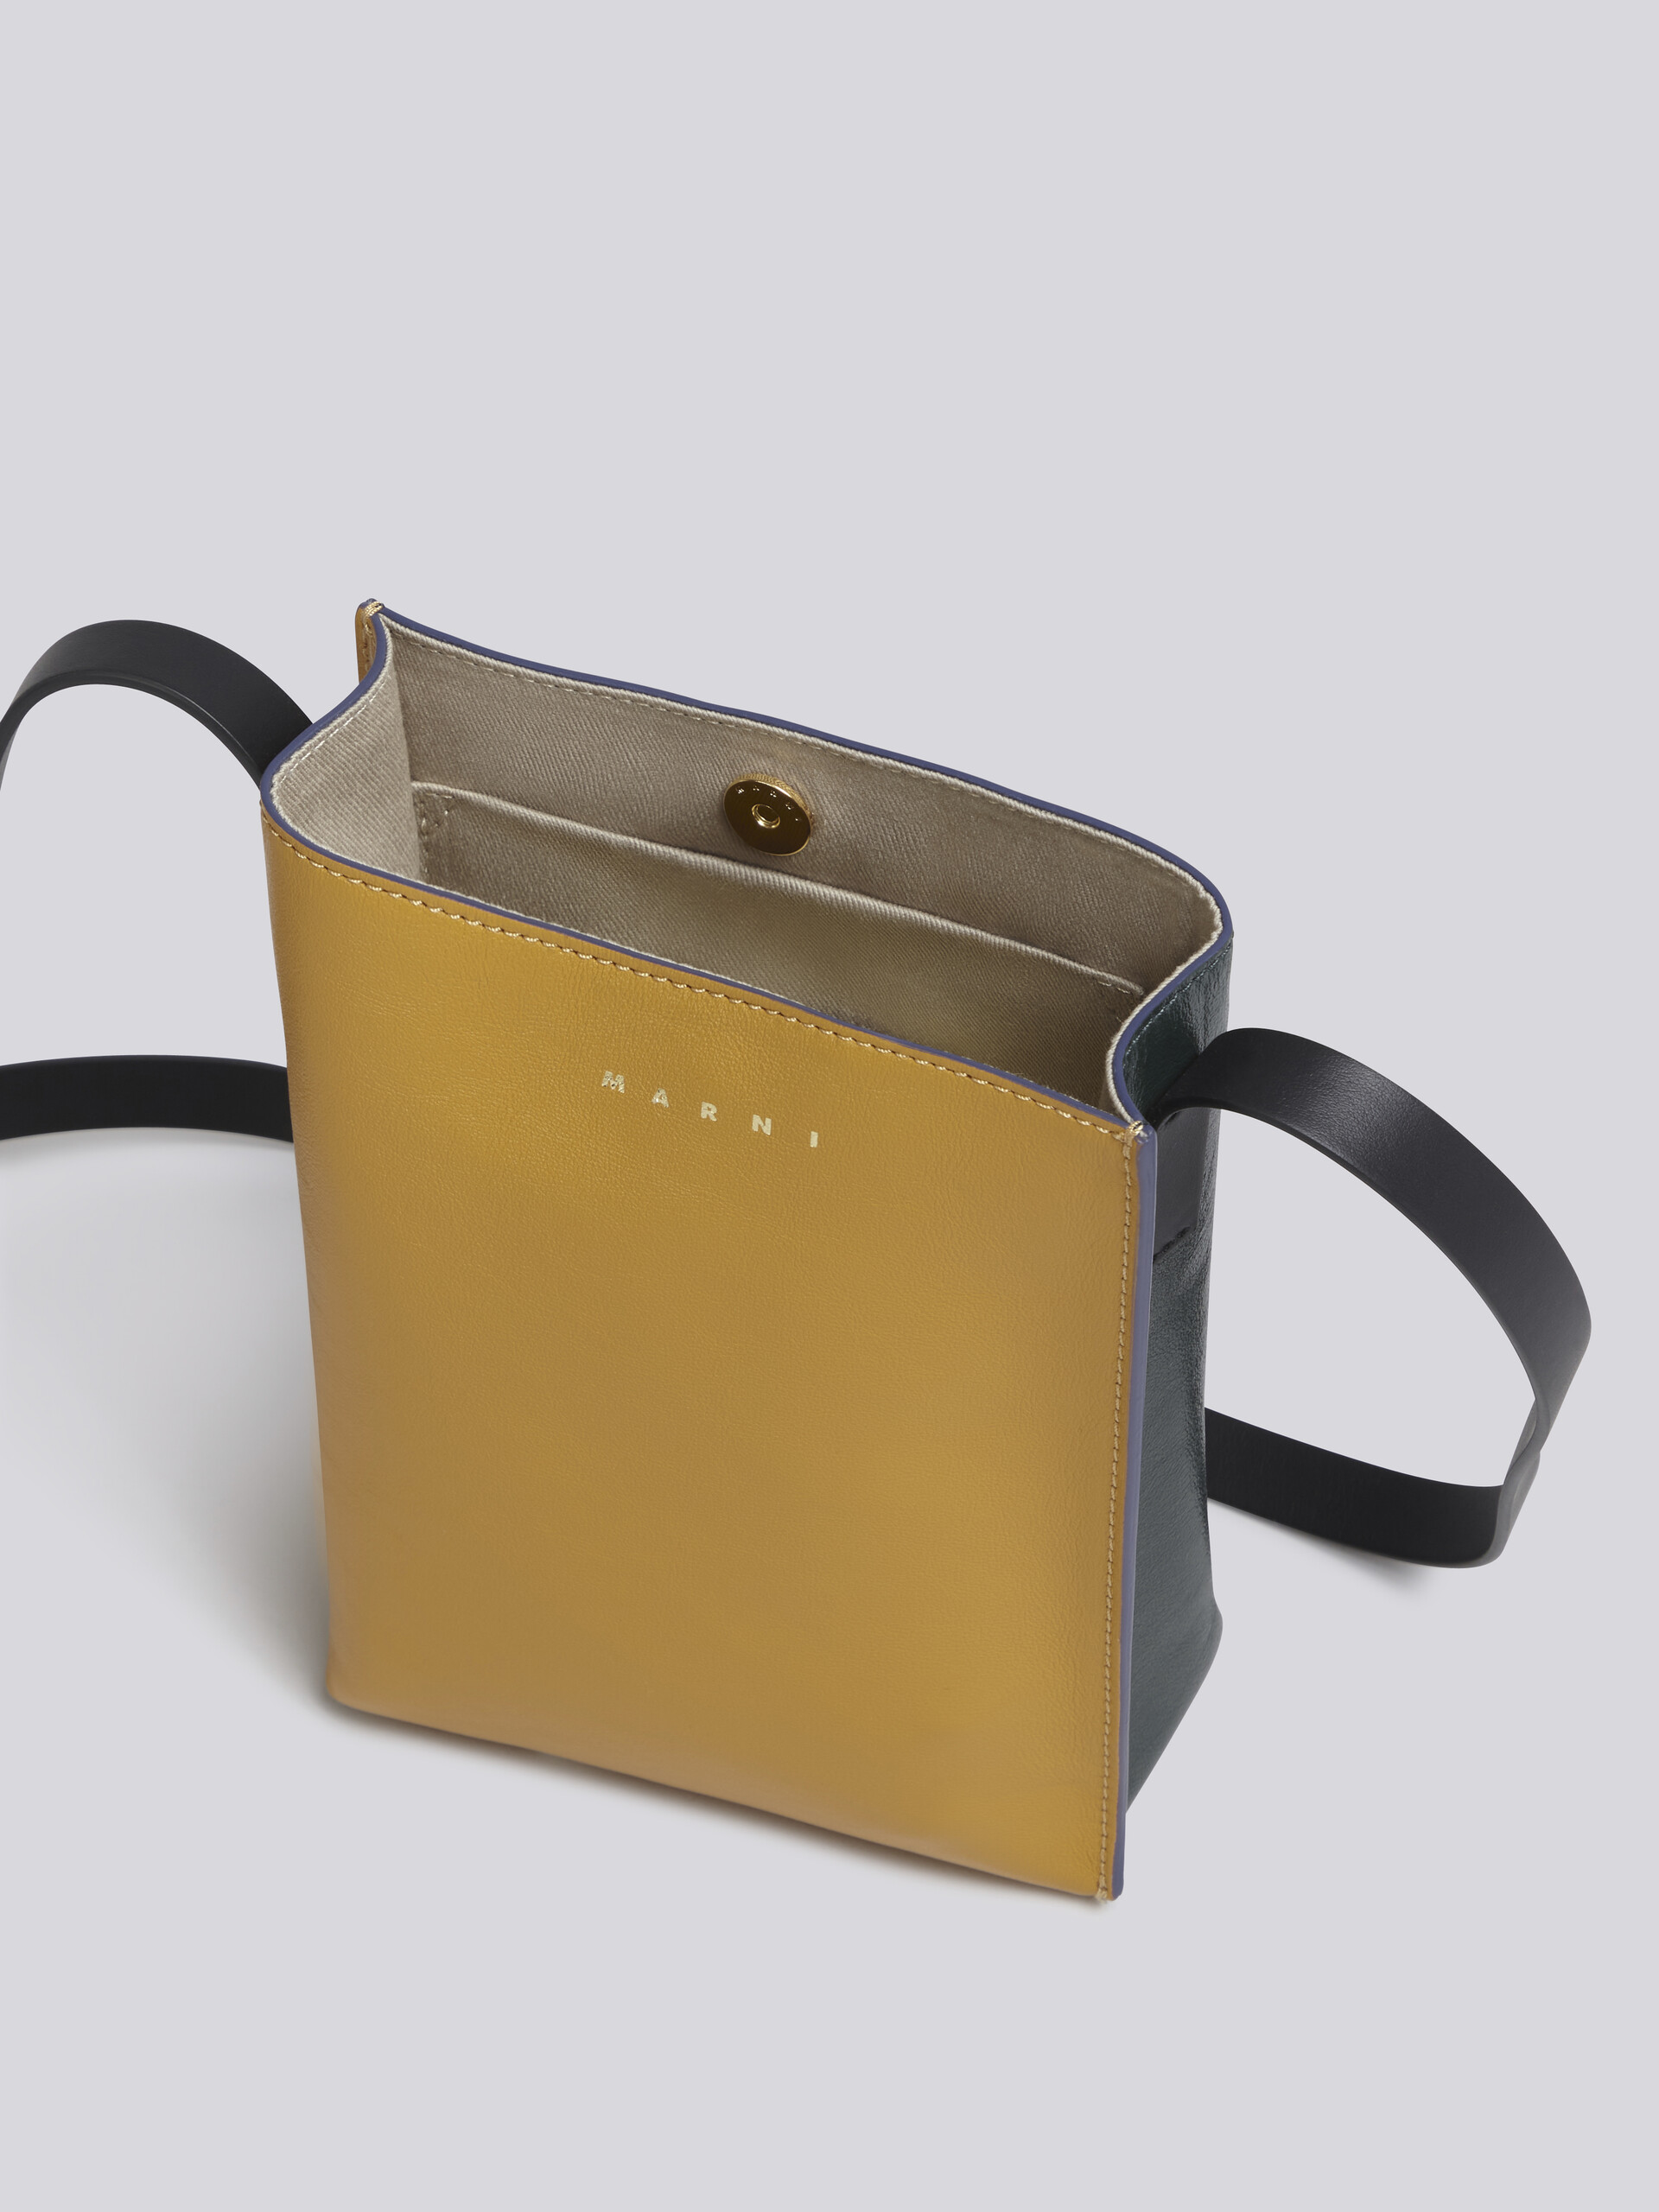 MUSEO SOFT nano bag in yellow and green leather - Shoulder Bags - Image 3